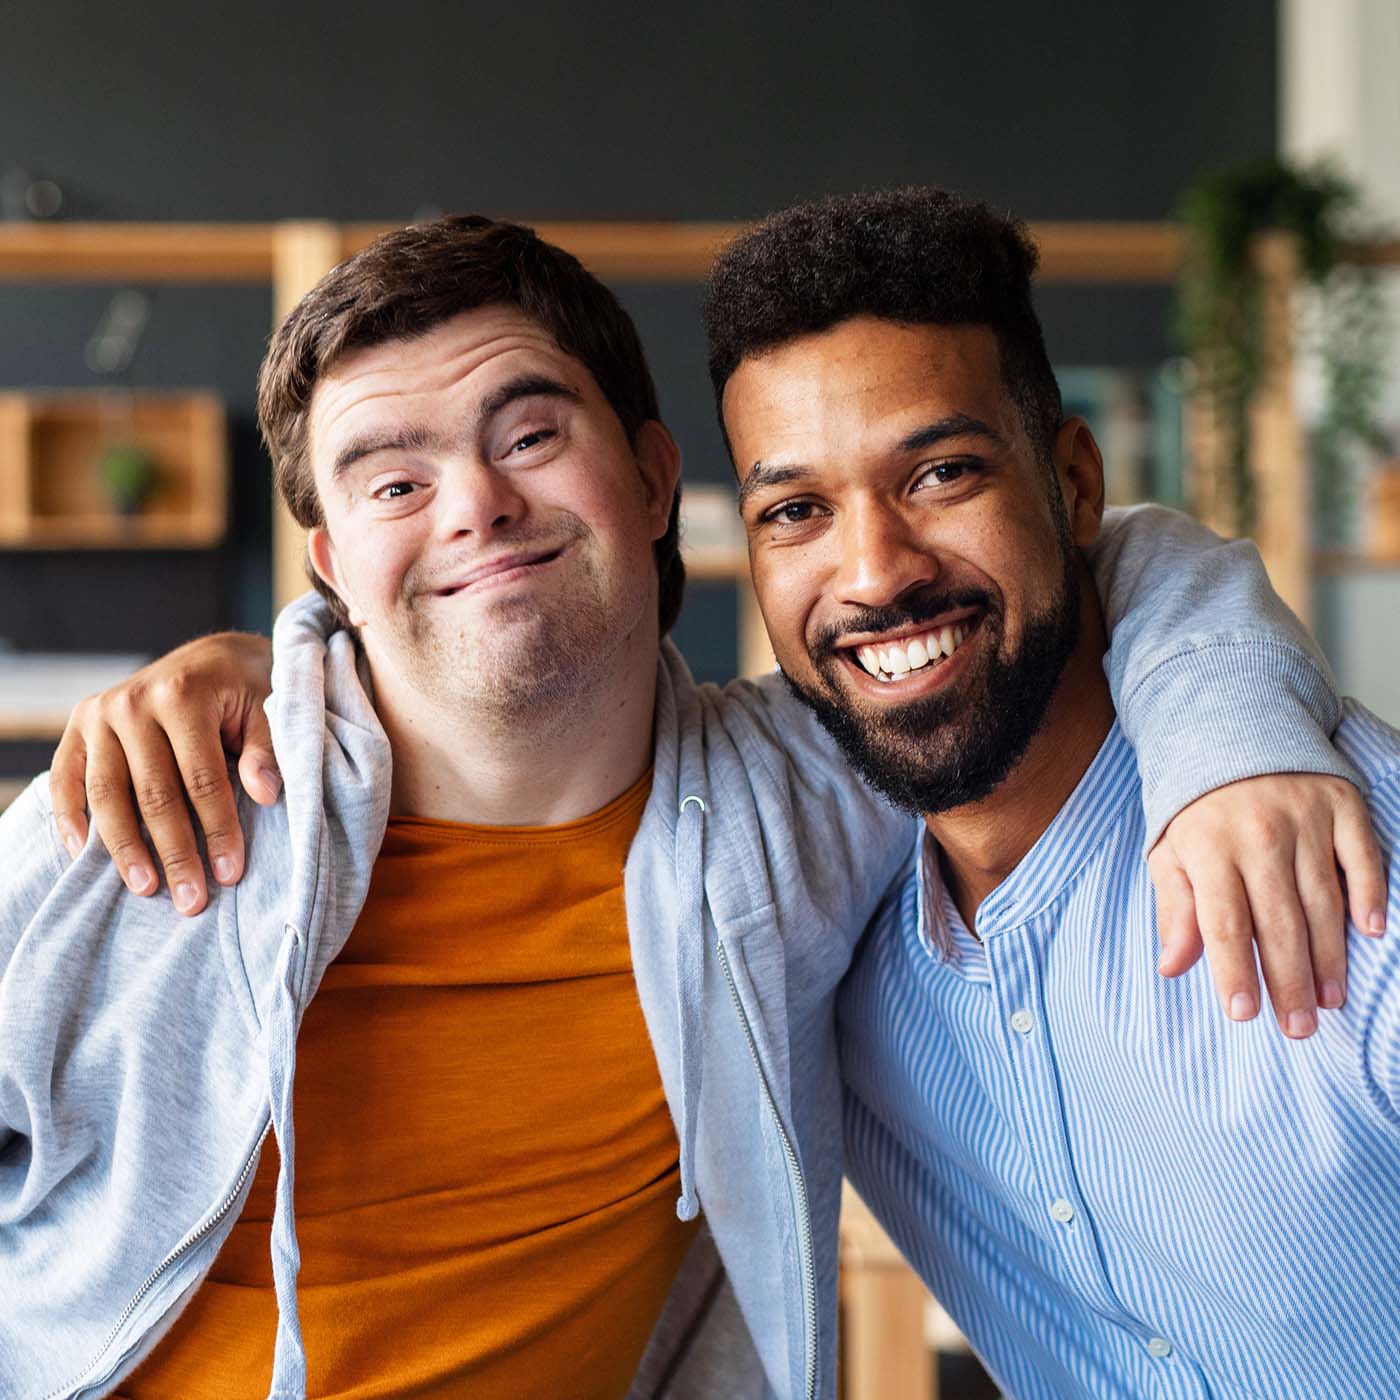 confident young man with autism with his mentor smiling with arms on each others shoulders